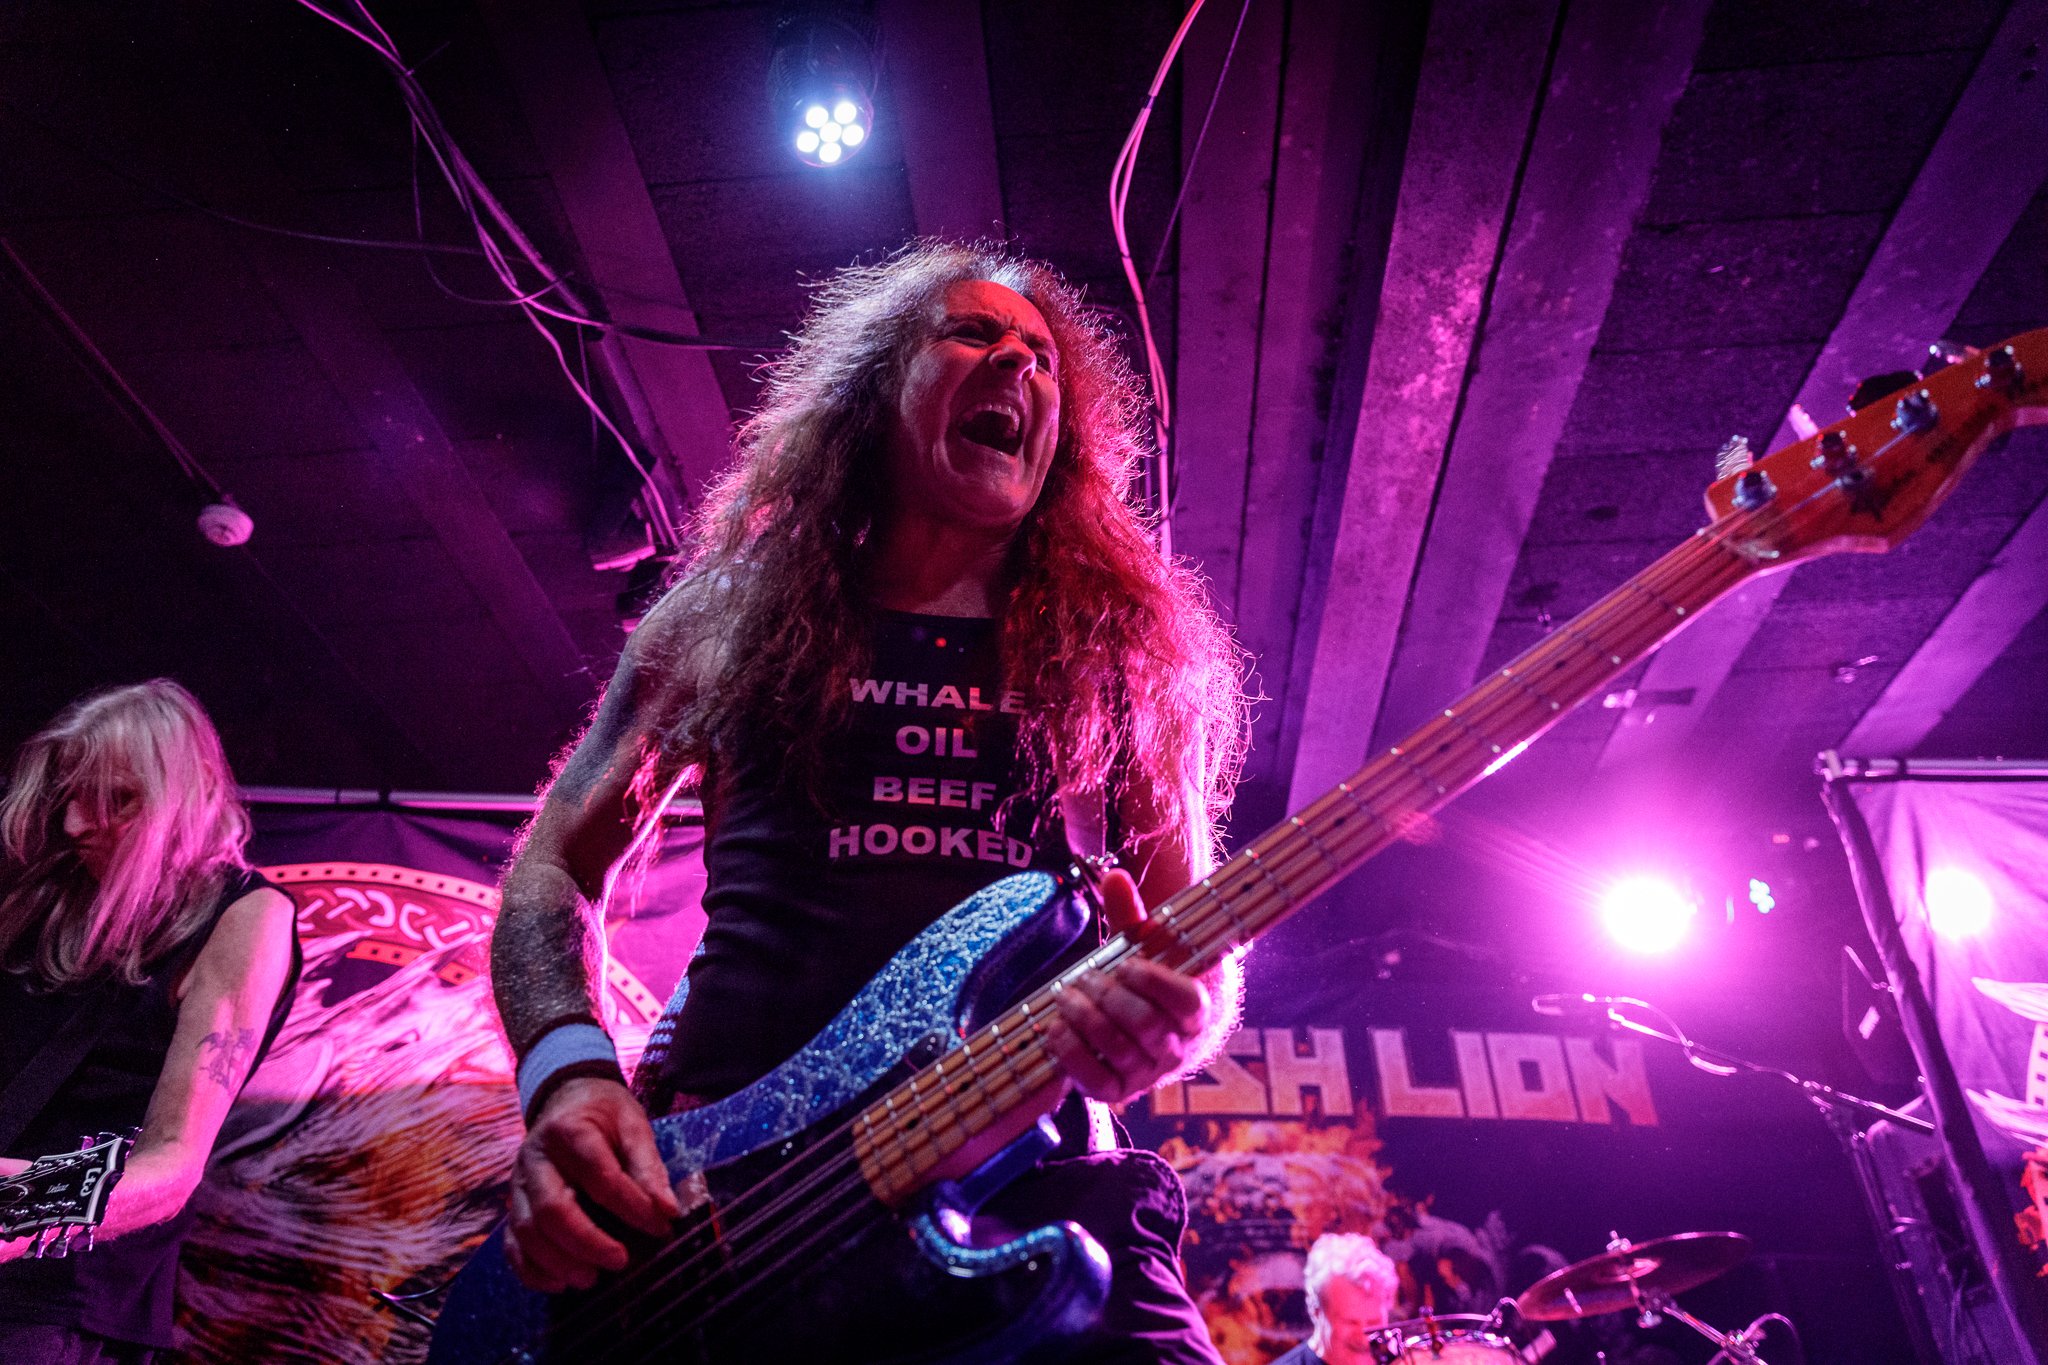 British Lion at Rebellion in Manchester on November 29th 2021 ©